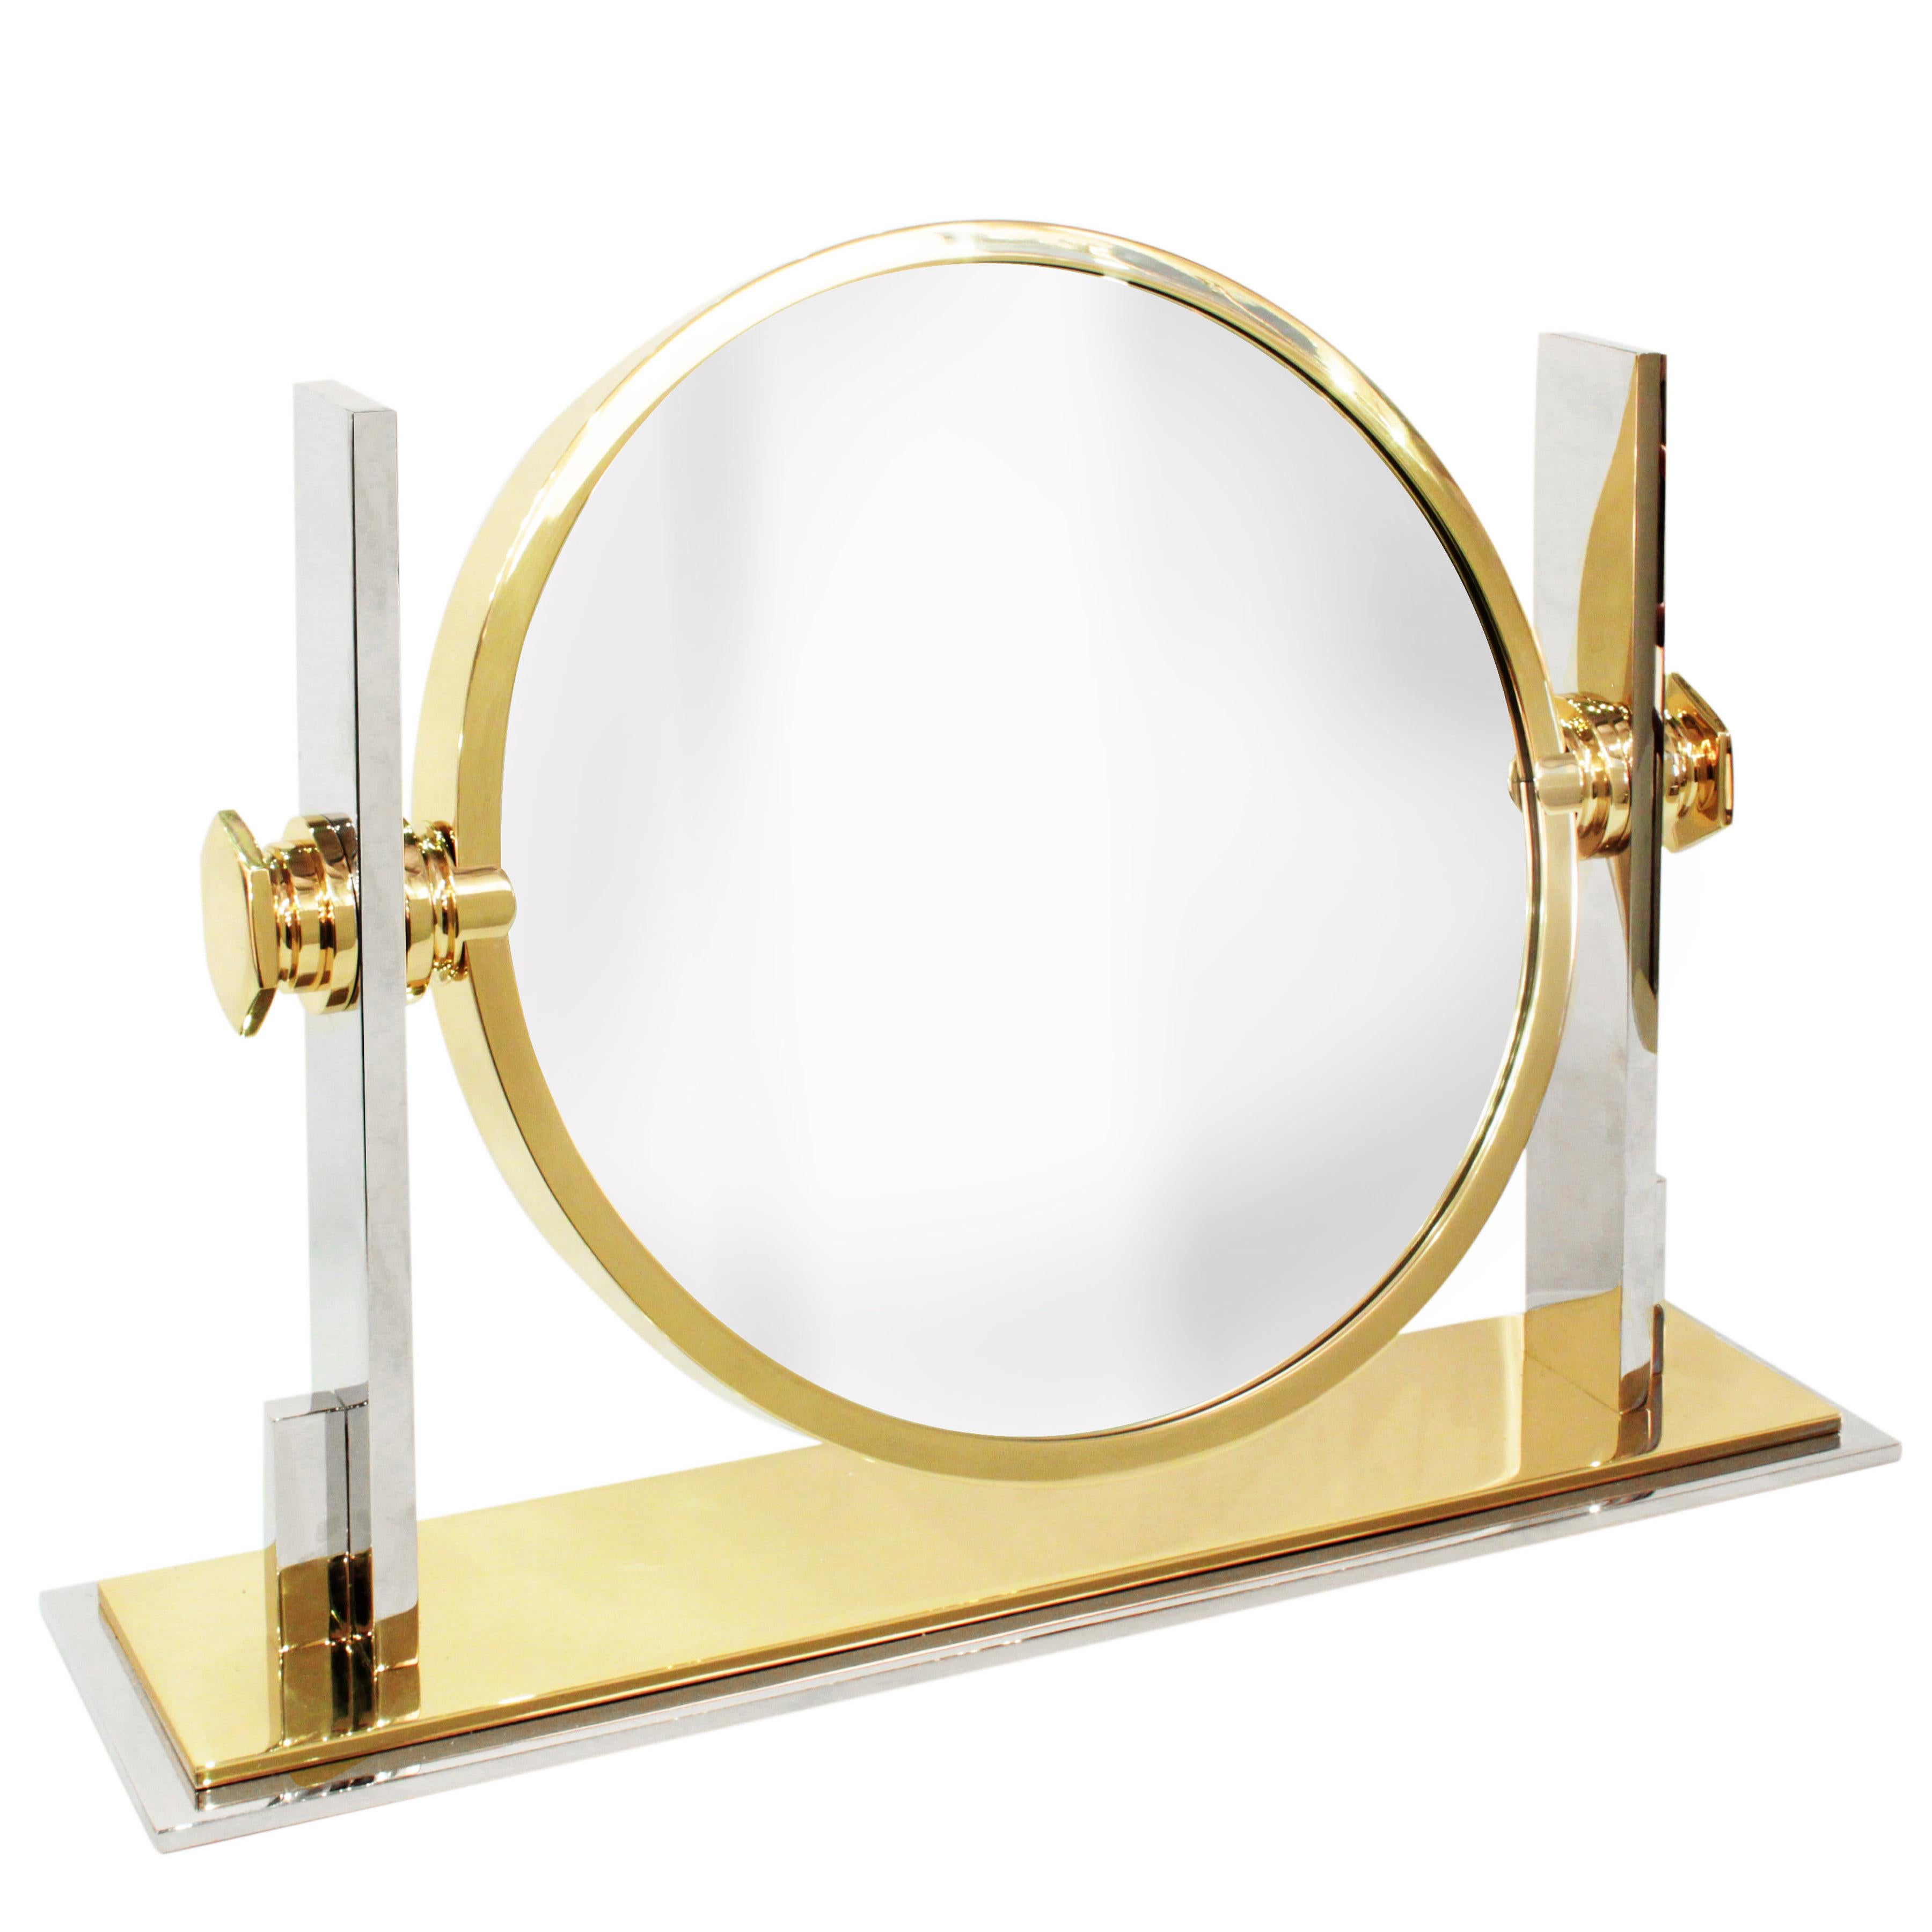 Meticulously crafted extra large vanity/dressing table mirror in polished steel and brass with magnifier on one side and standard mirror on the other by Karl Springer, American 1980's. This one is larger than the ones which are usually offered for